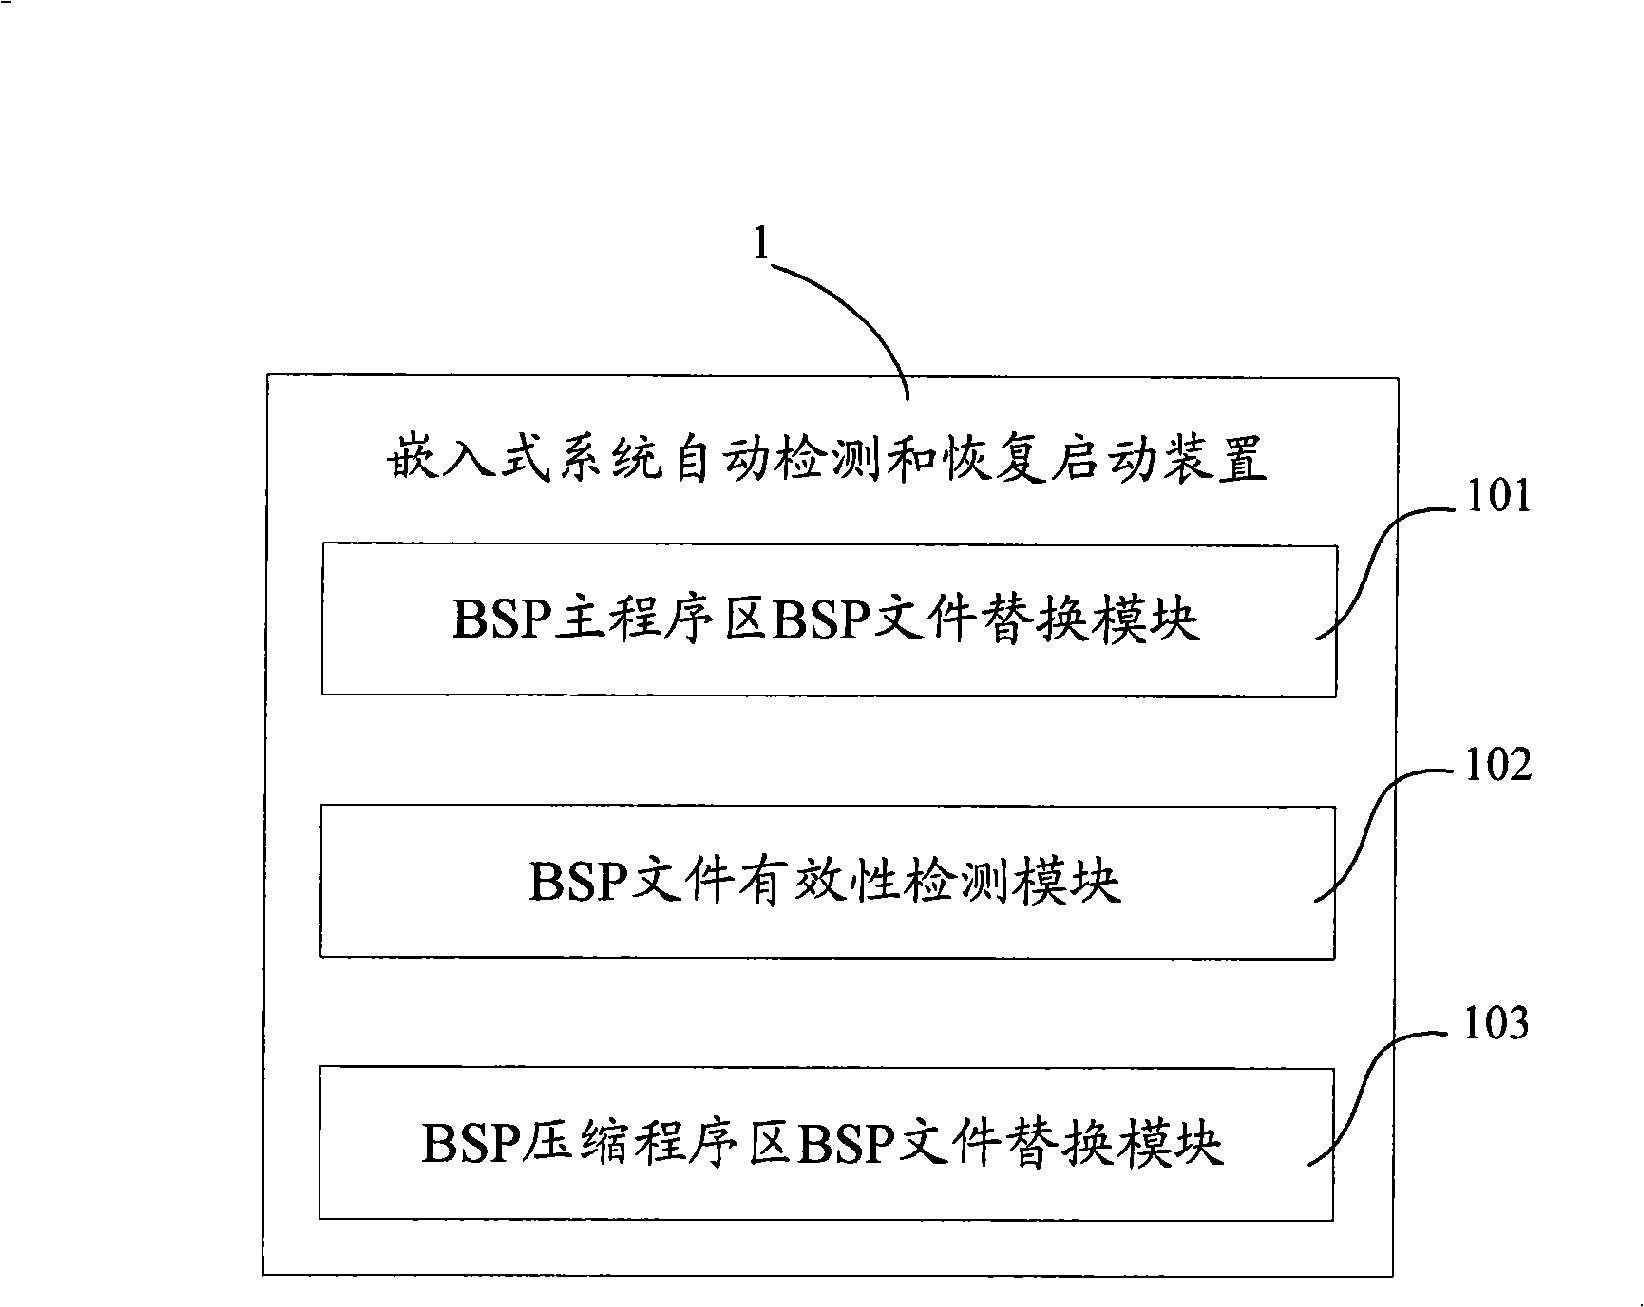 Method and apparatus for automatically detecting and recovering start-up of embedded system